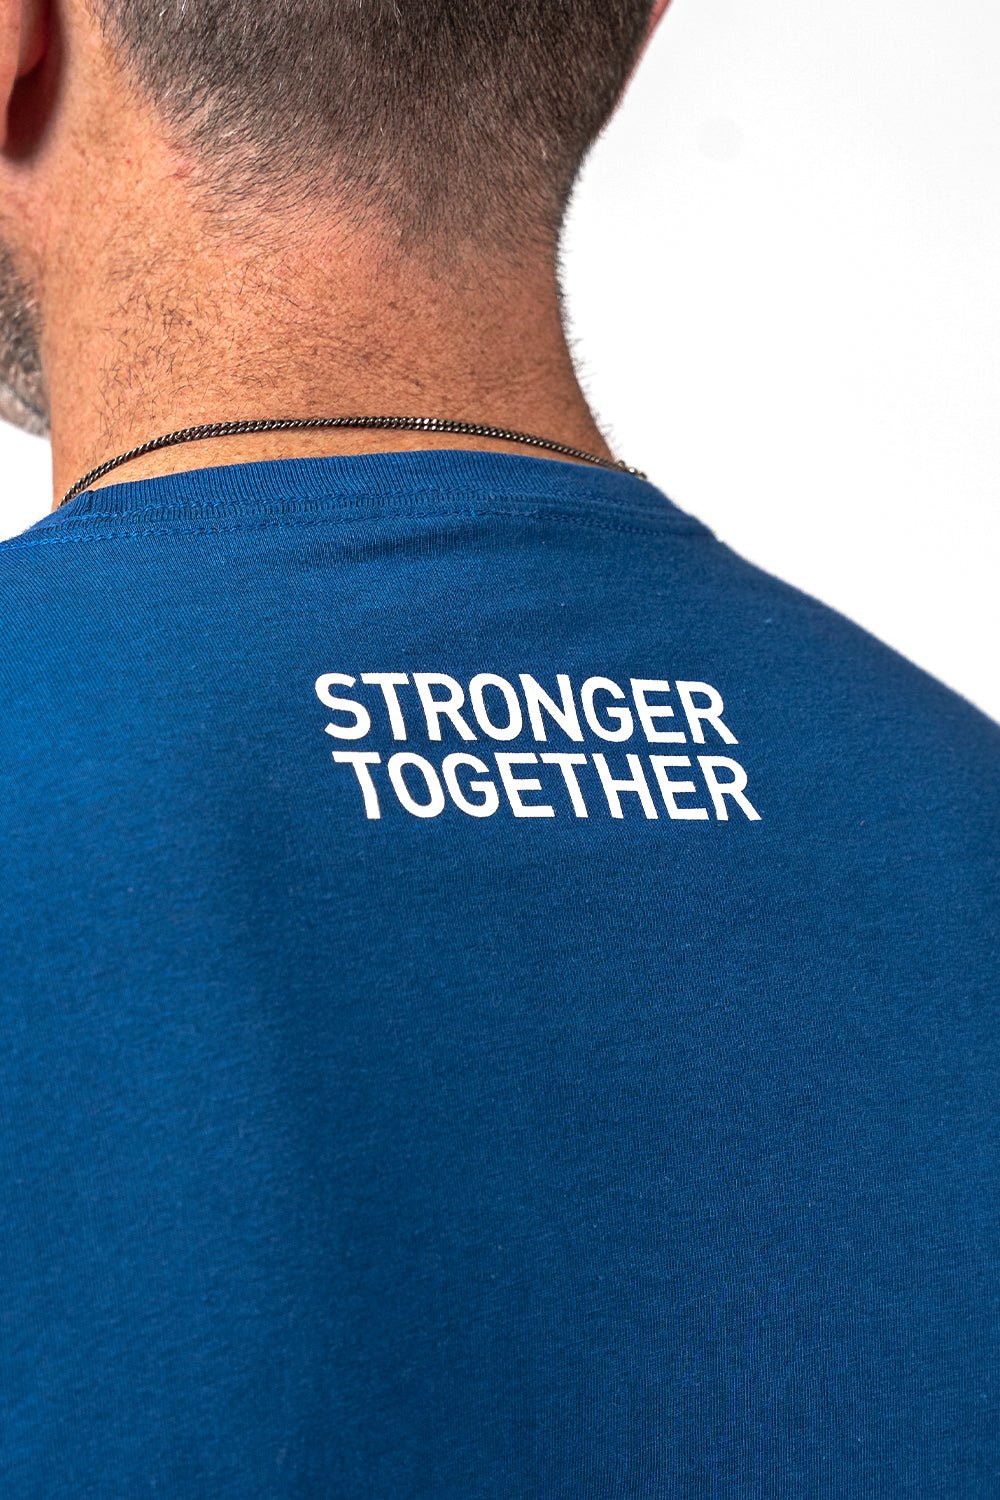 United Together Mens Tee - Cool Blue